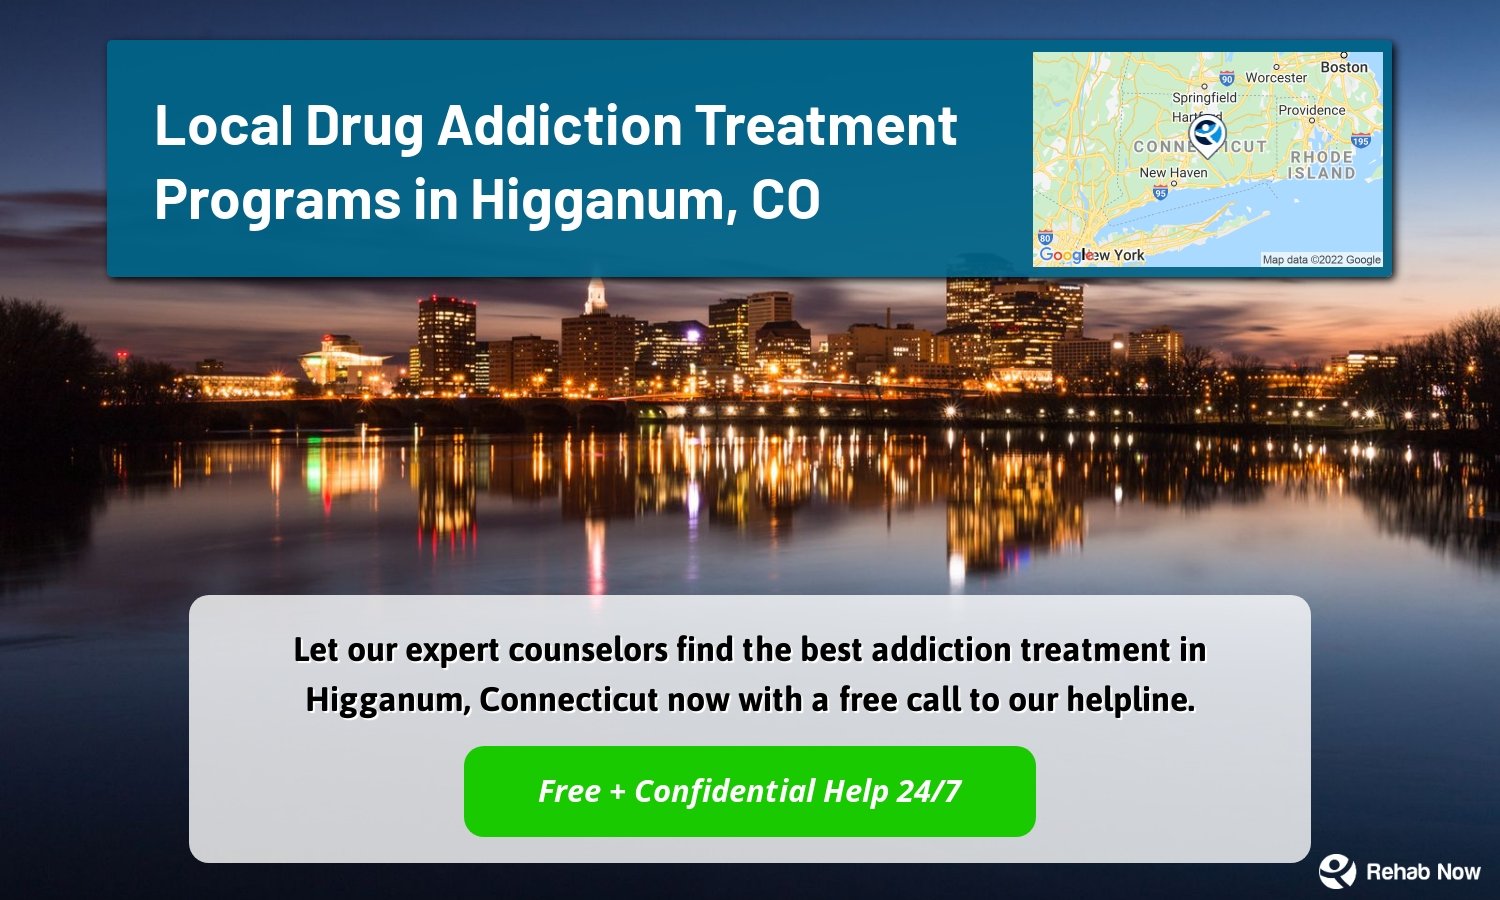 Let our expert counselors find the best addiction treatment in Higganum, Connecticut now with a free call to our helpline.